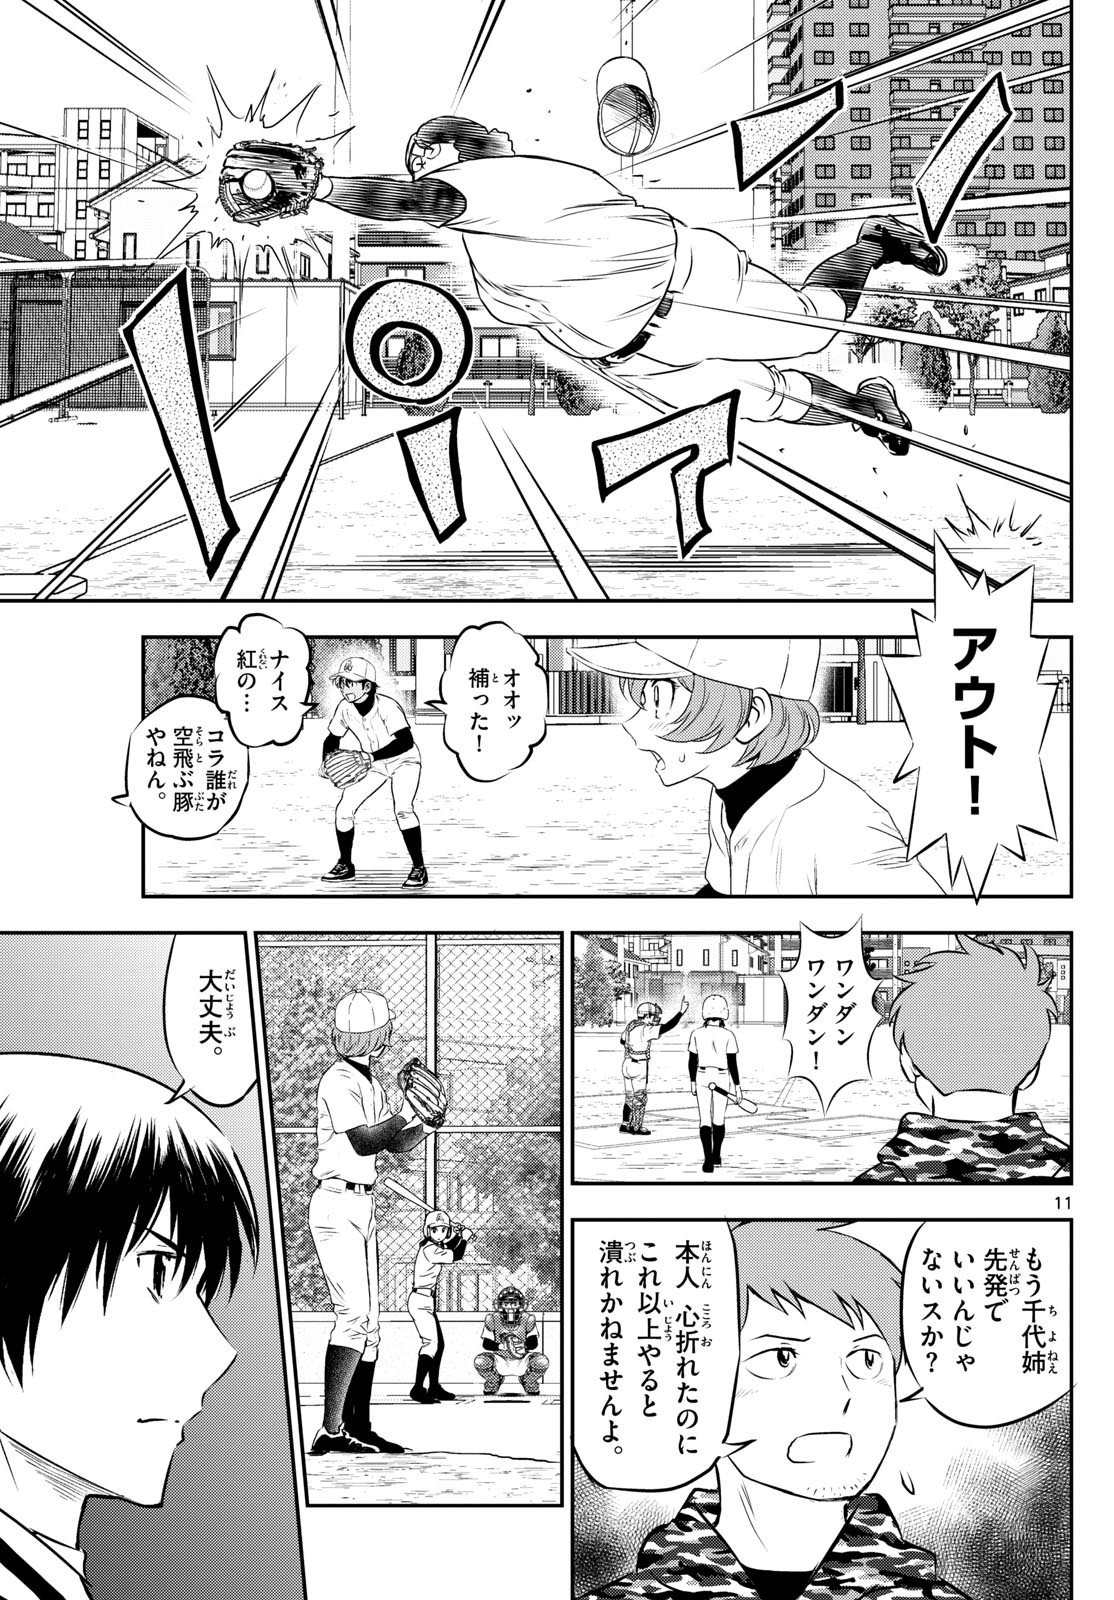 Major 2nd - メジャーセカンド - Chapter 281 - Page 11